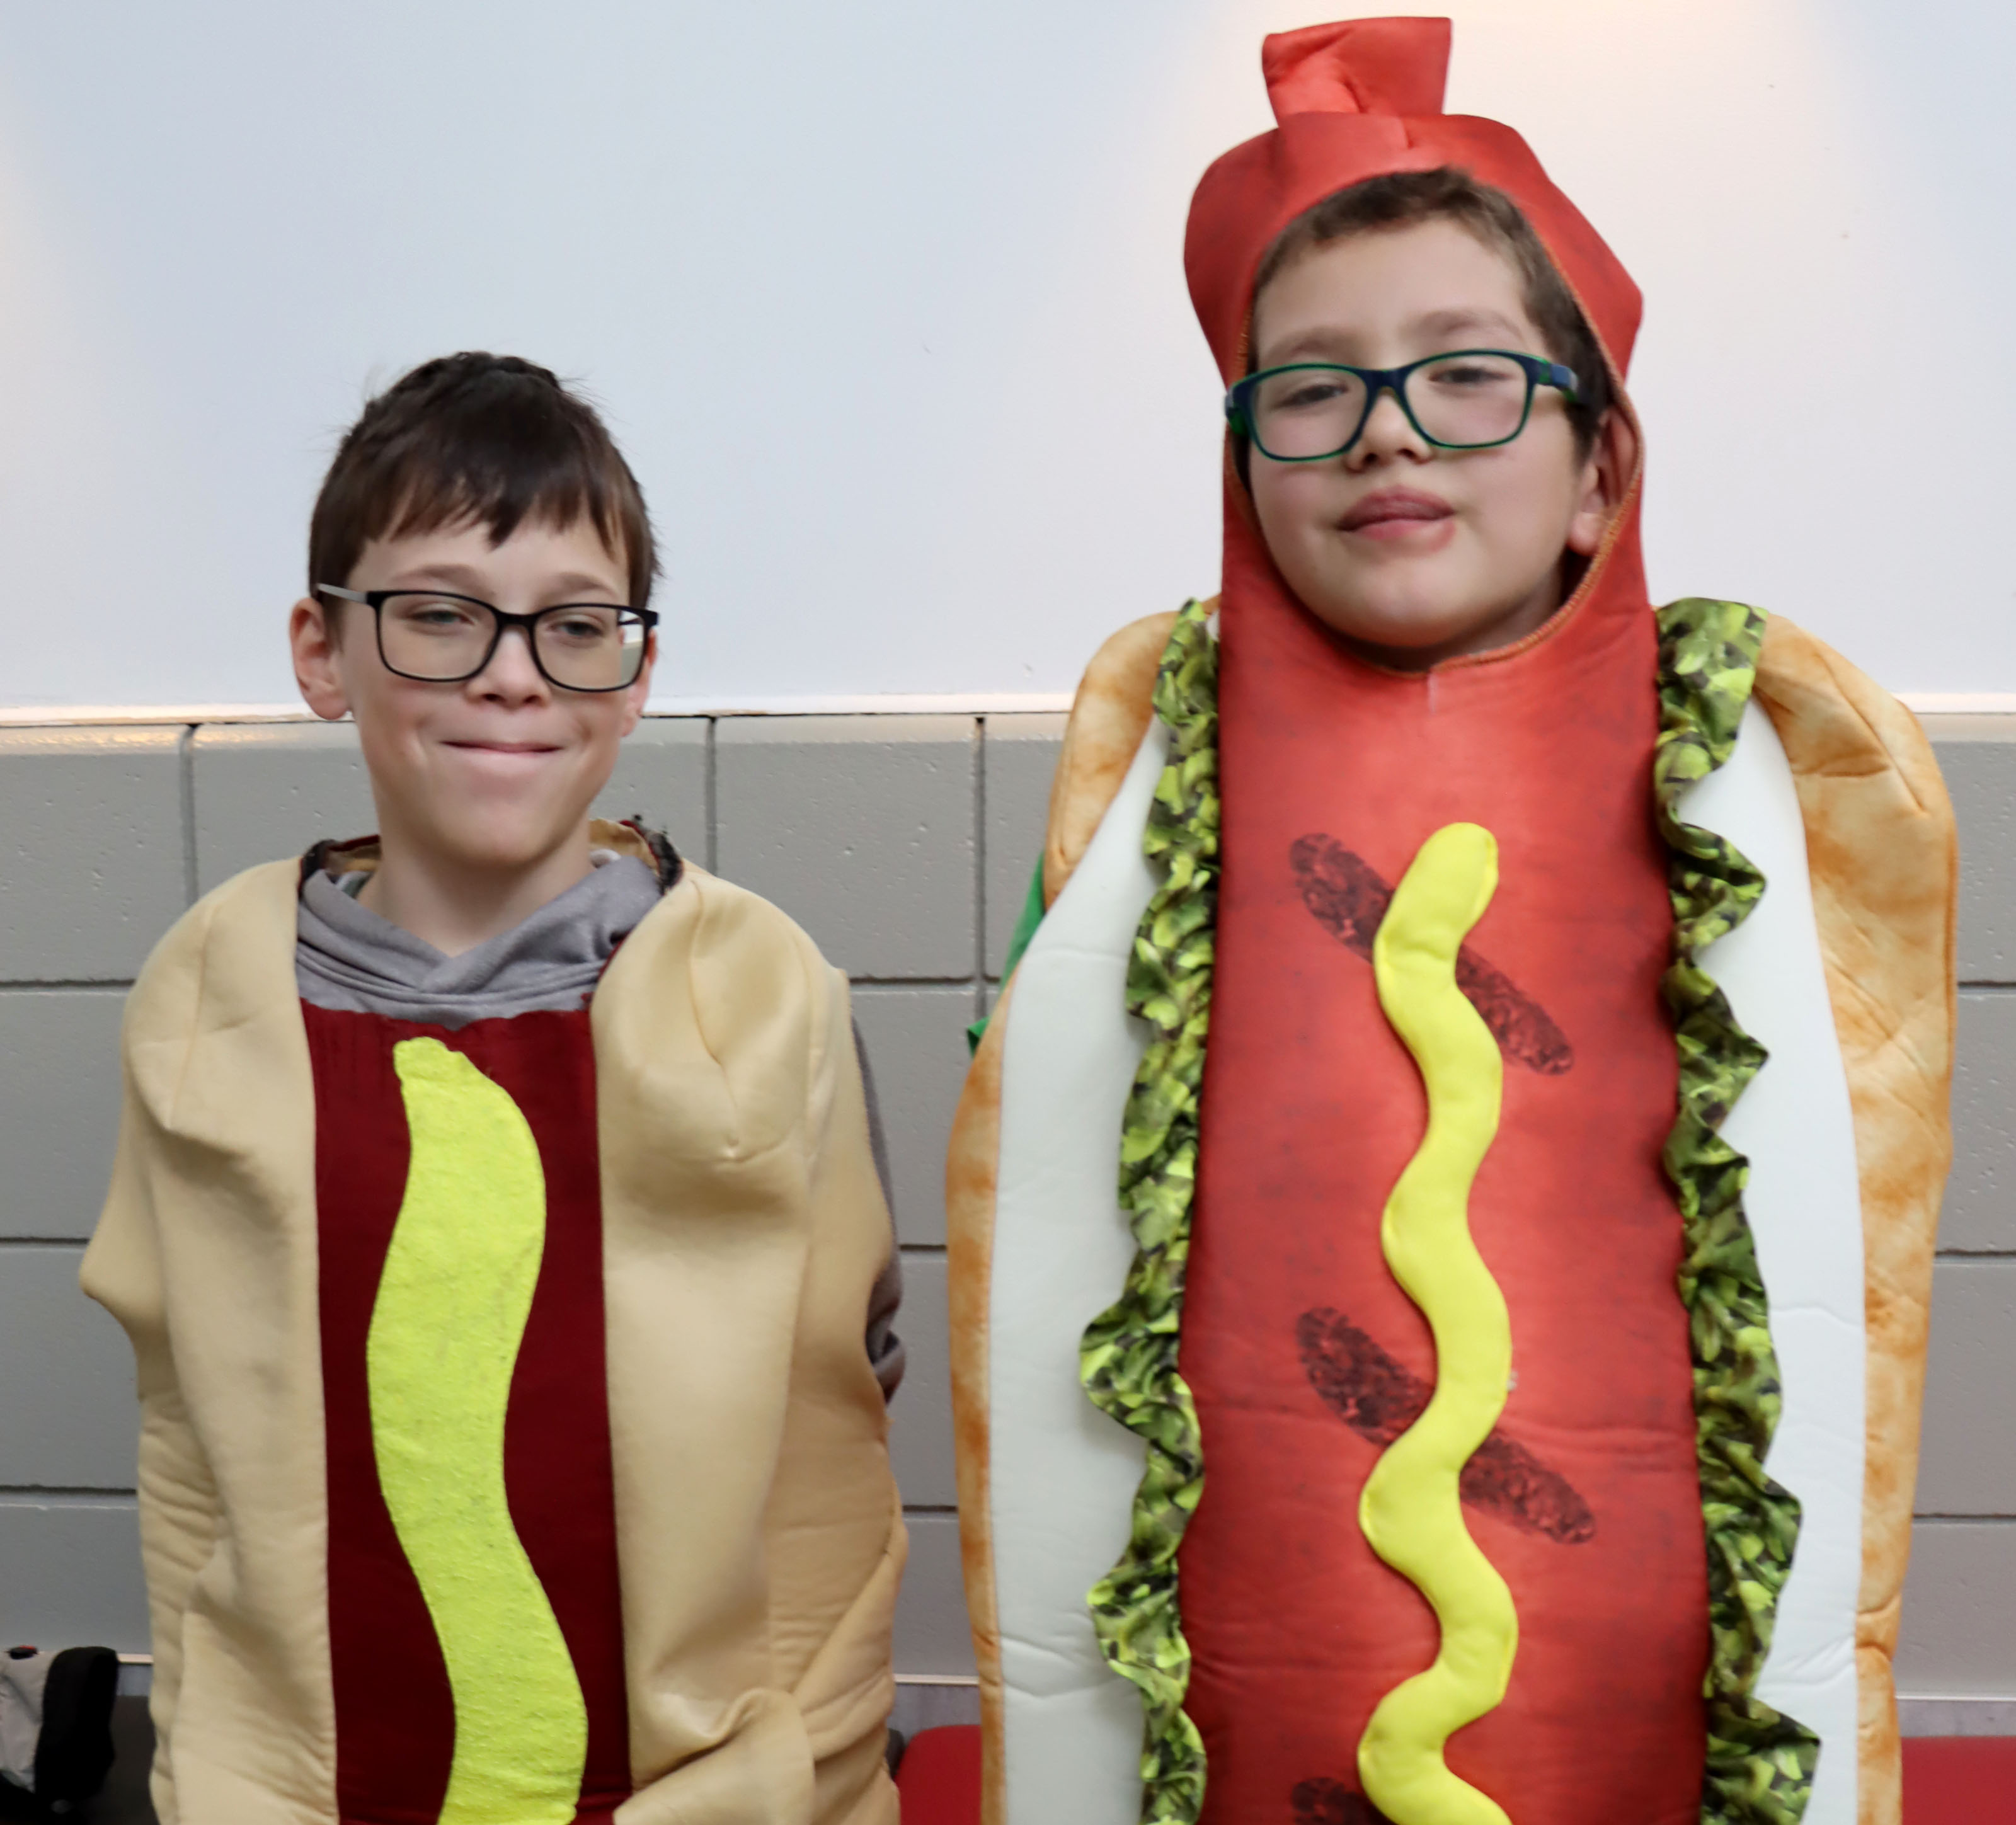 two boys dressed as hotdogs for Halloween